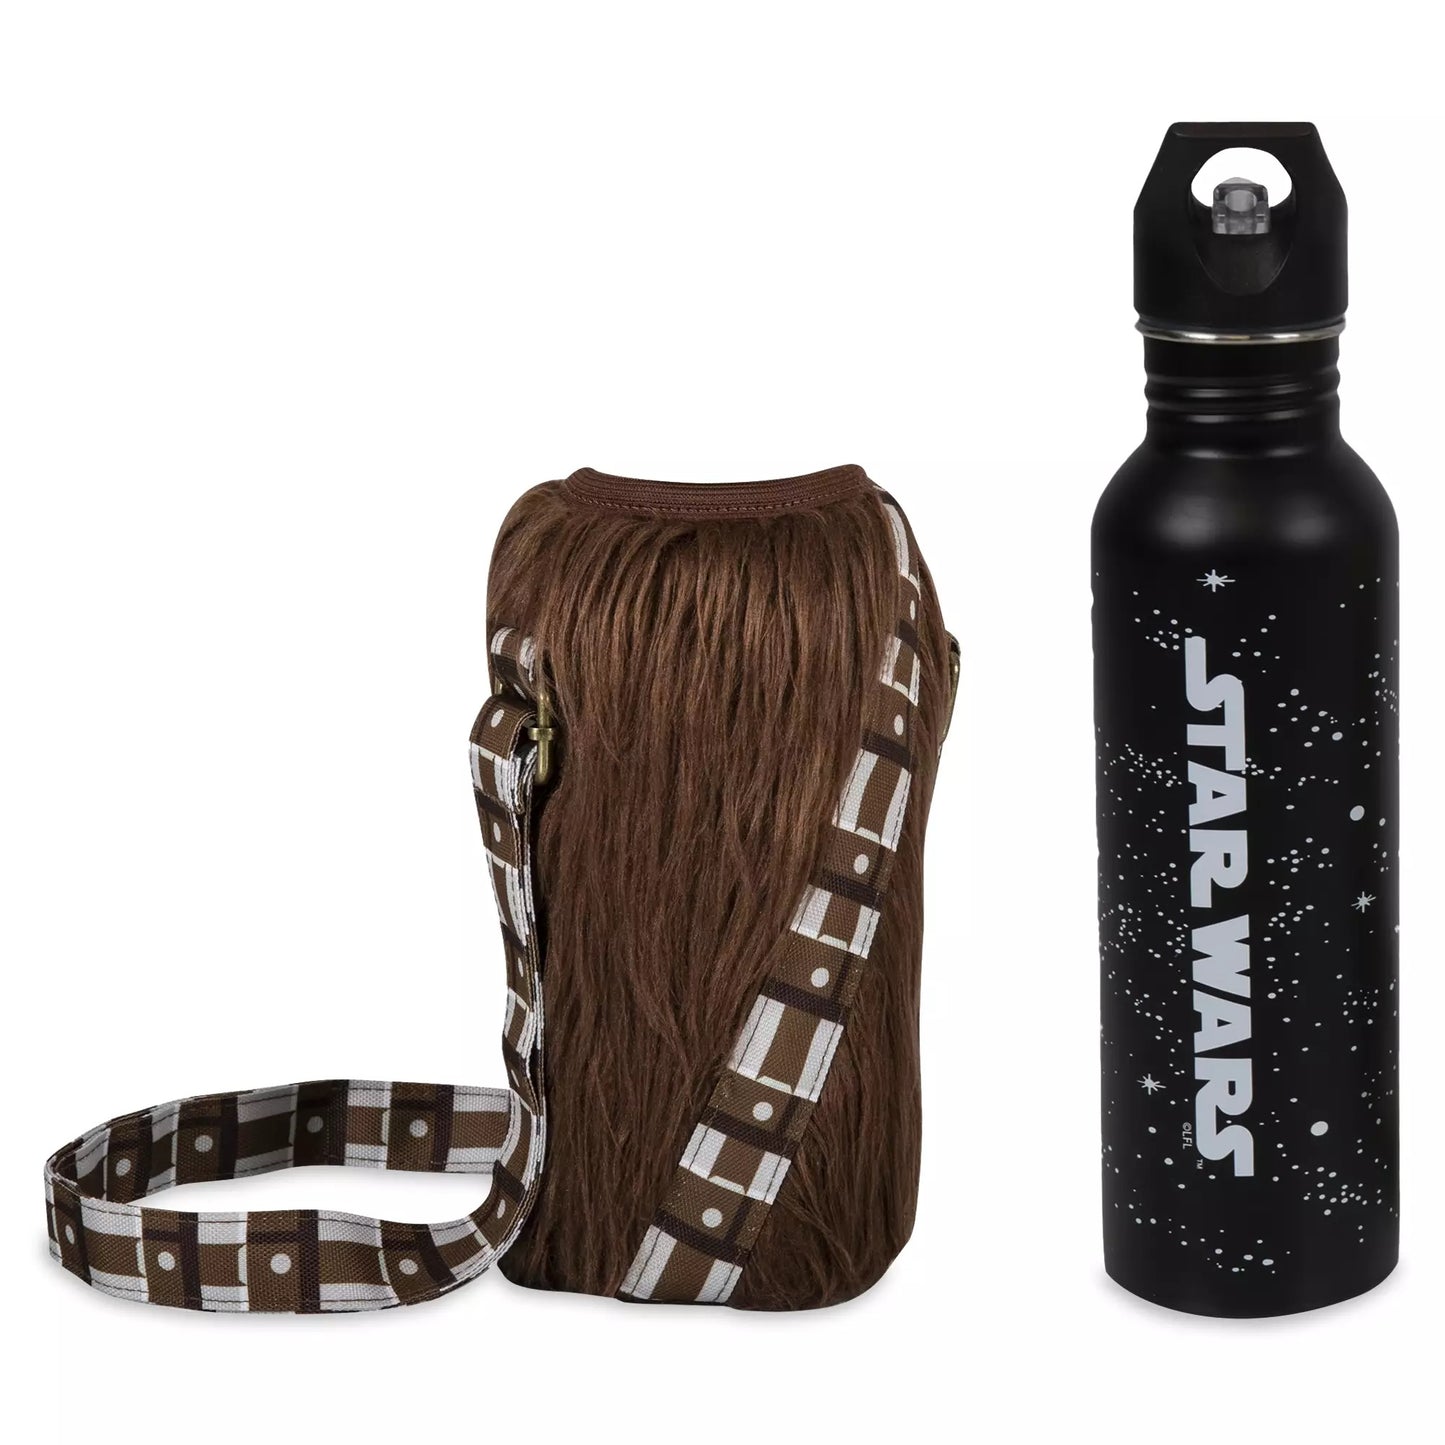 Chewbacca Stainless Steel Water Bottle and Cooler Tote